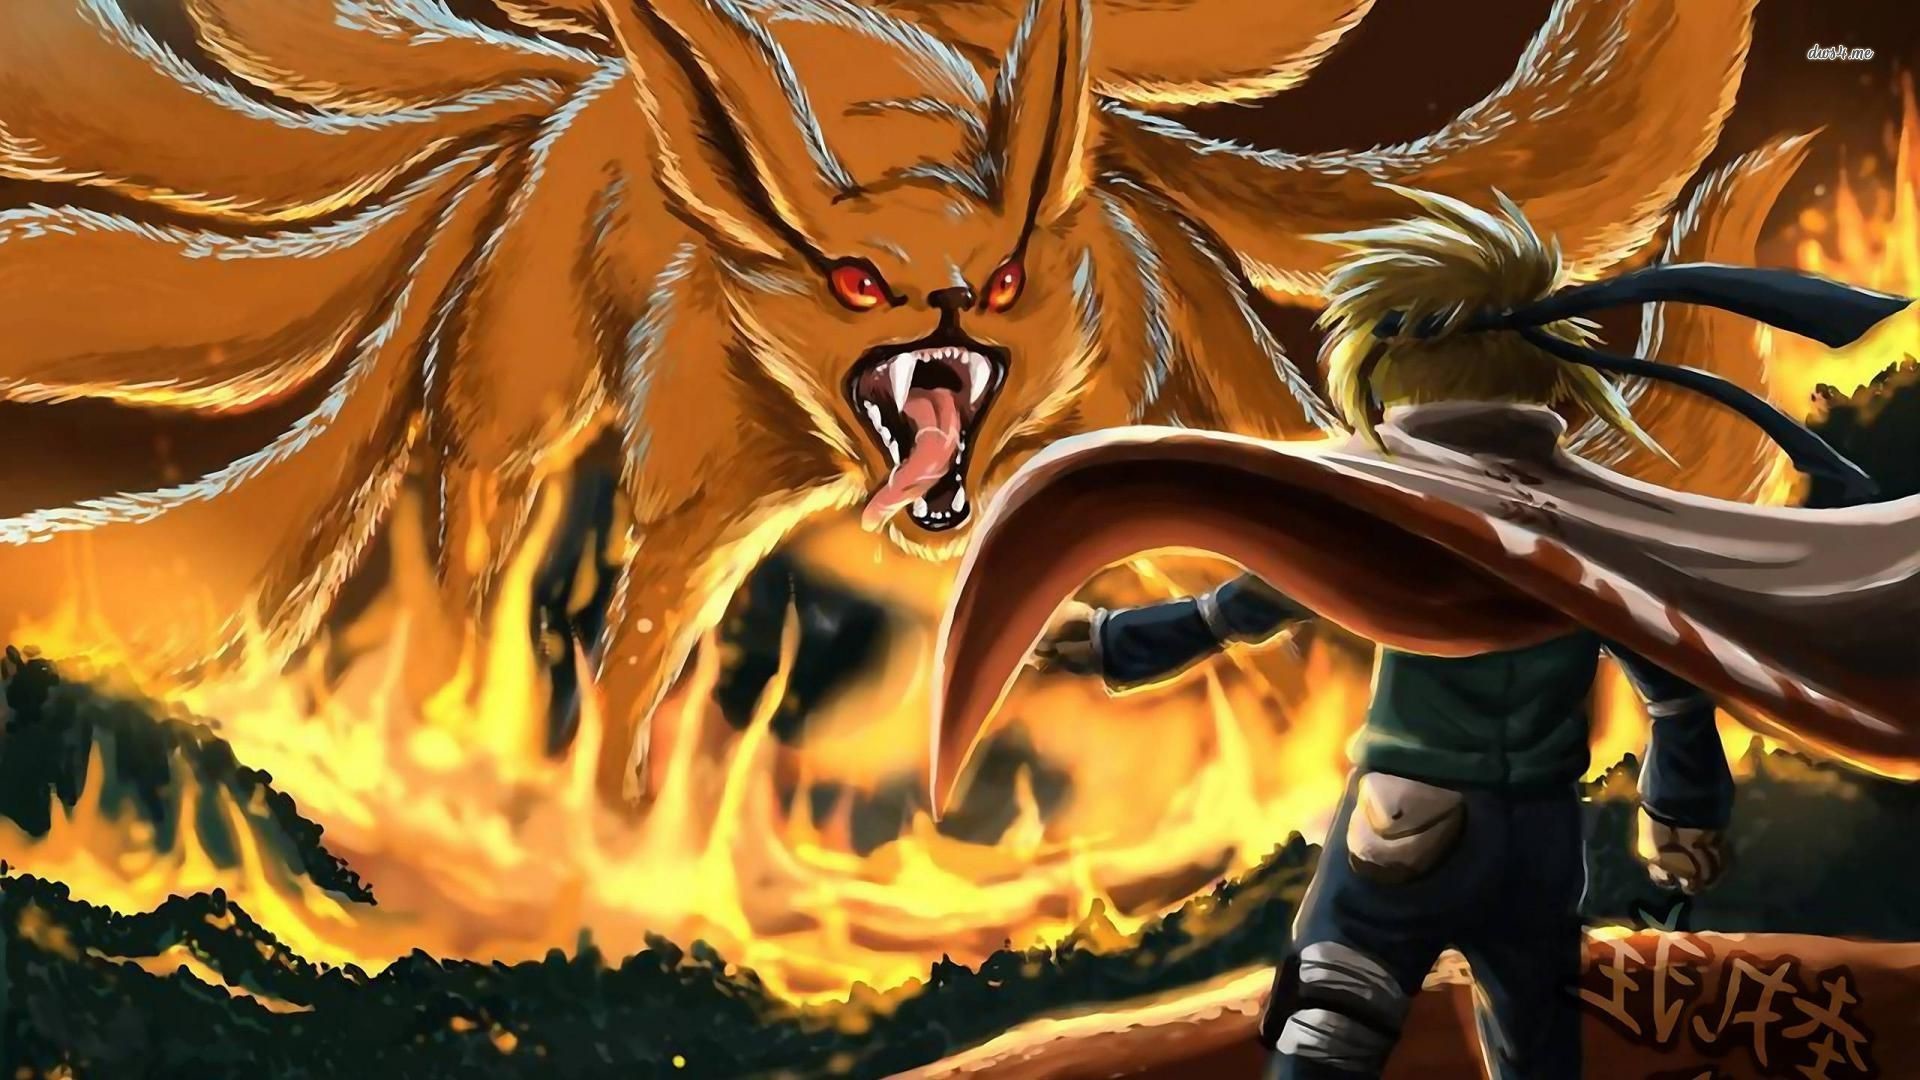 1920x1080 Kyuubi in flames - Naruto wallpaper - Anime wallpapers .